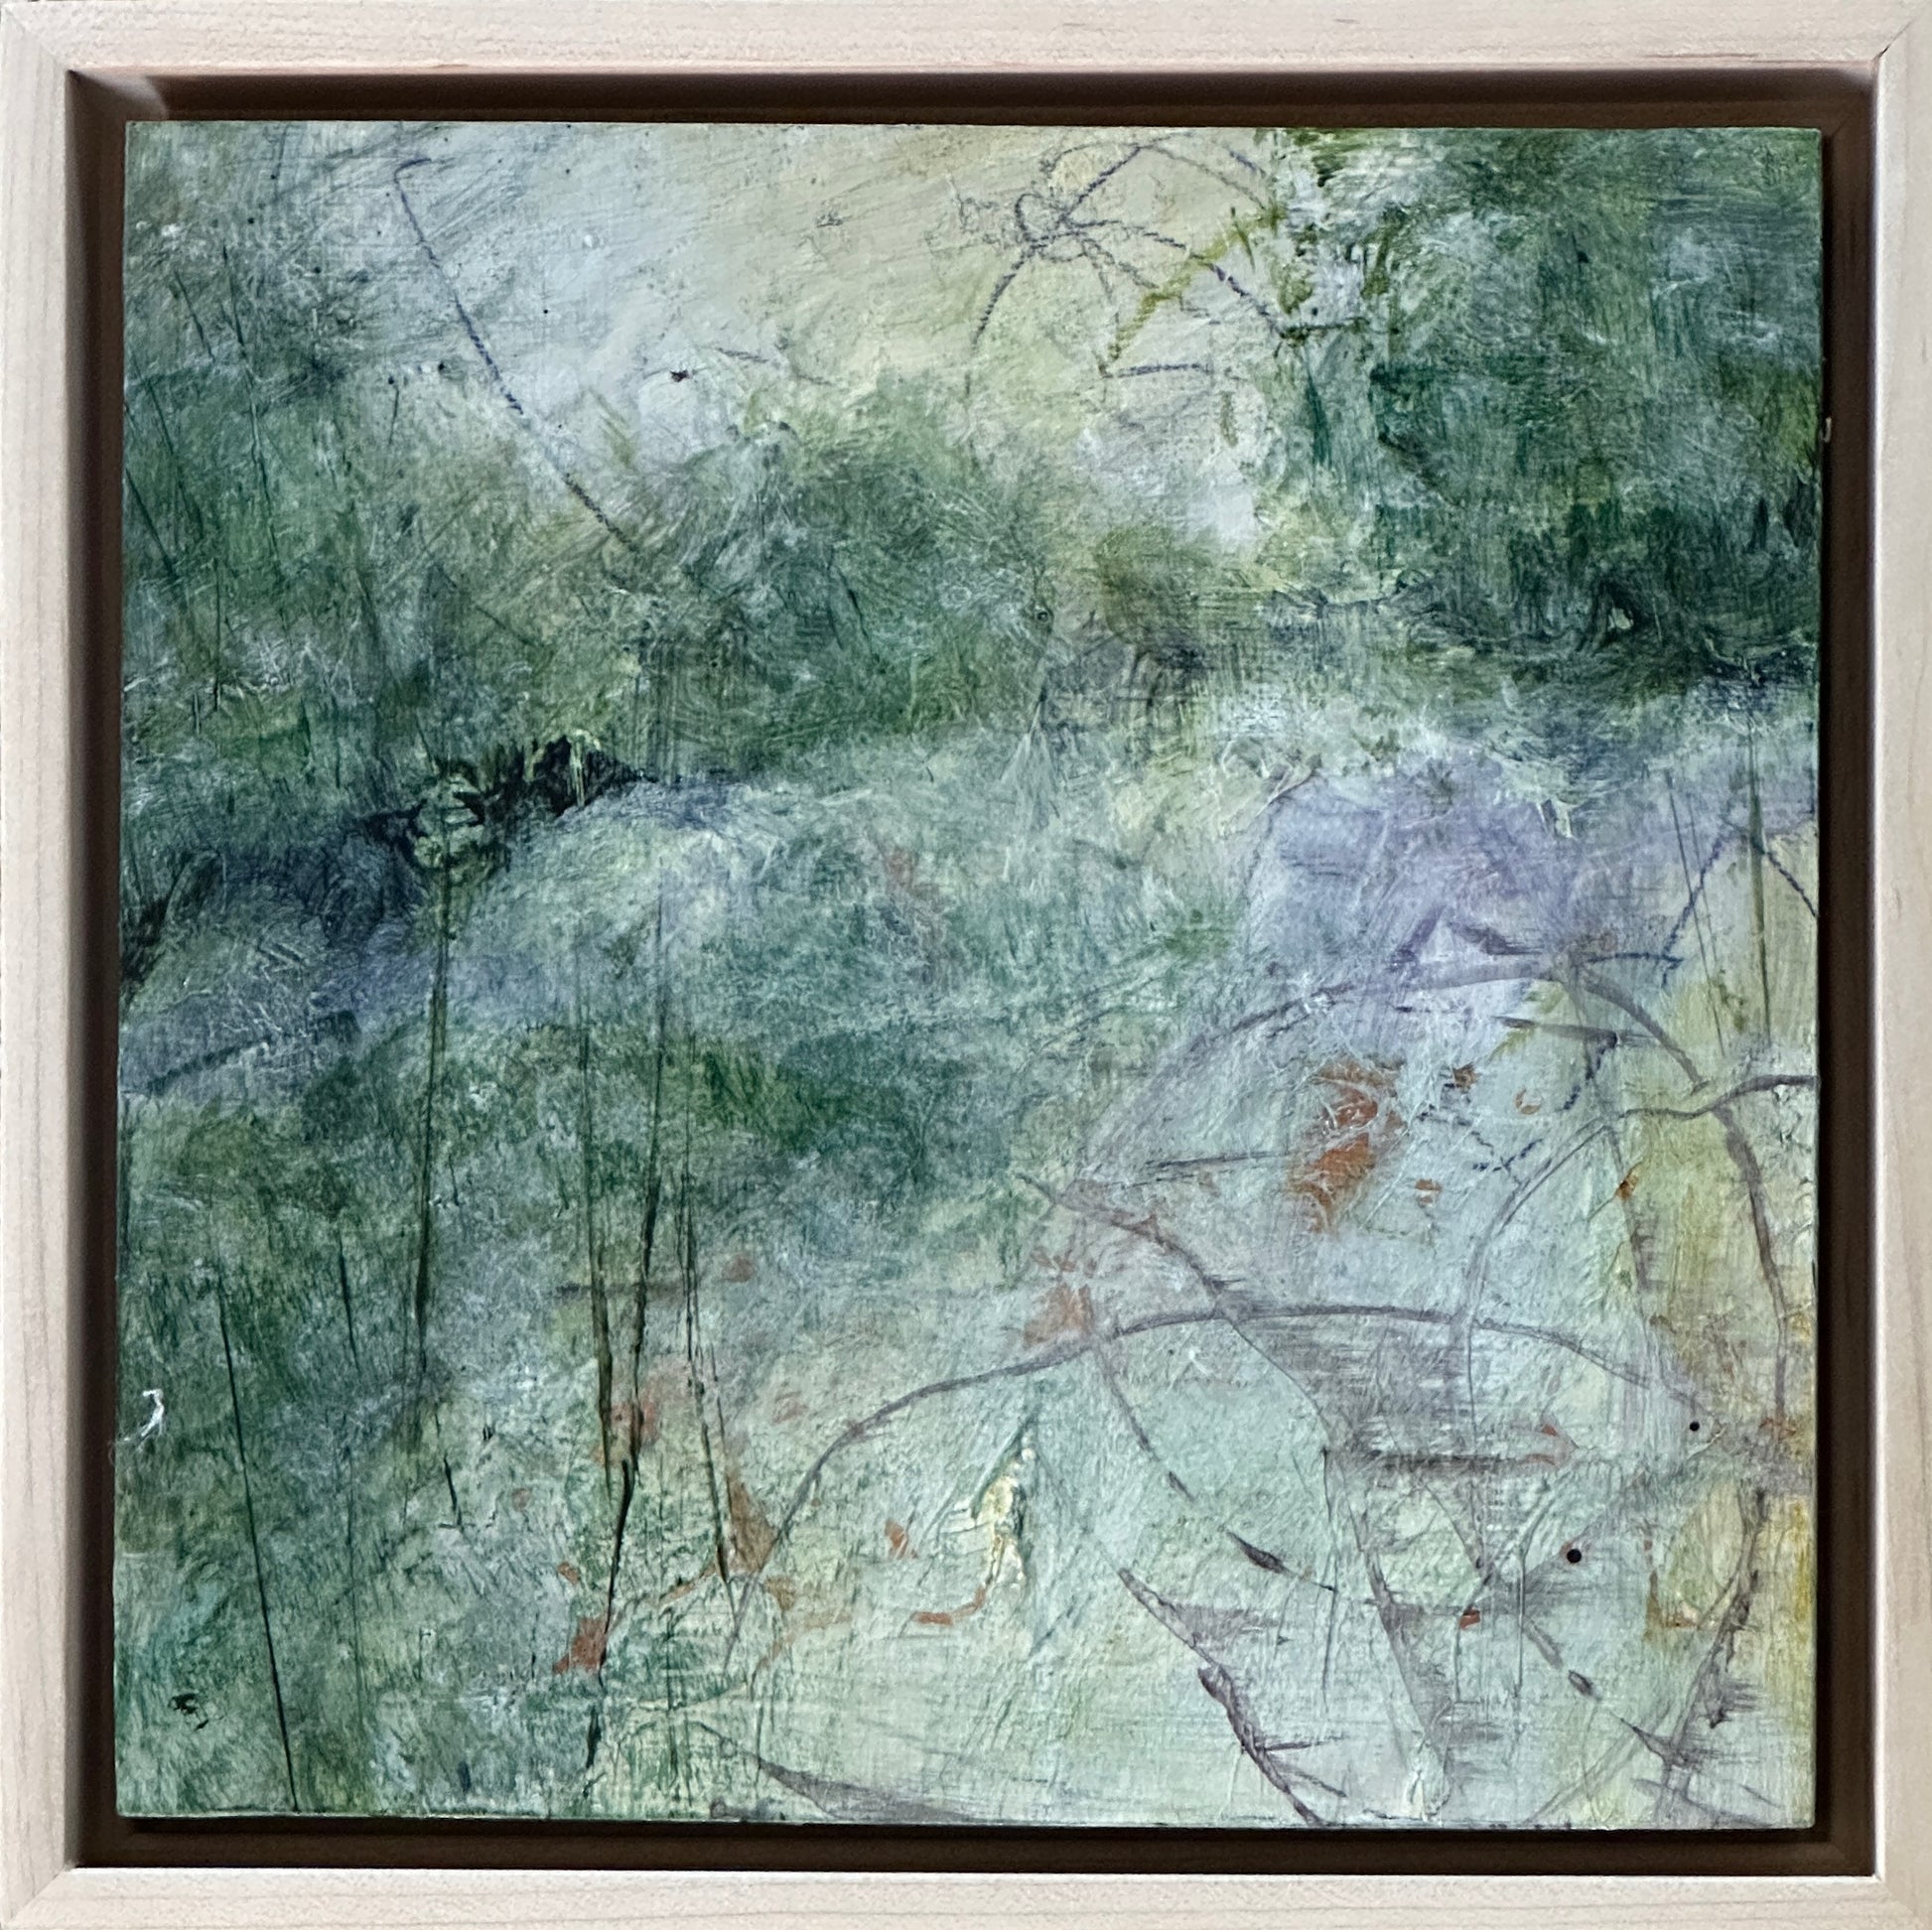 8 x 8 x 1.5-inch impression of a meditative state while in nature, unfocused on the surroundings  Acrylic painting on cradled panel with natural wood frame.  By Cumming, GA artist, Juanita Bellavance. Part of our 25 Days of Minis 2022 collection.  Collect them all!